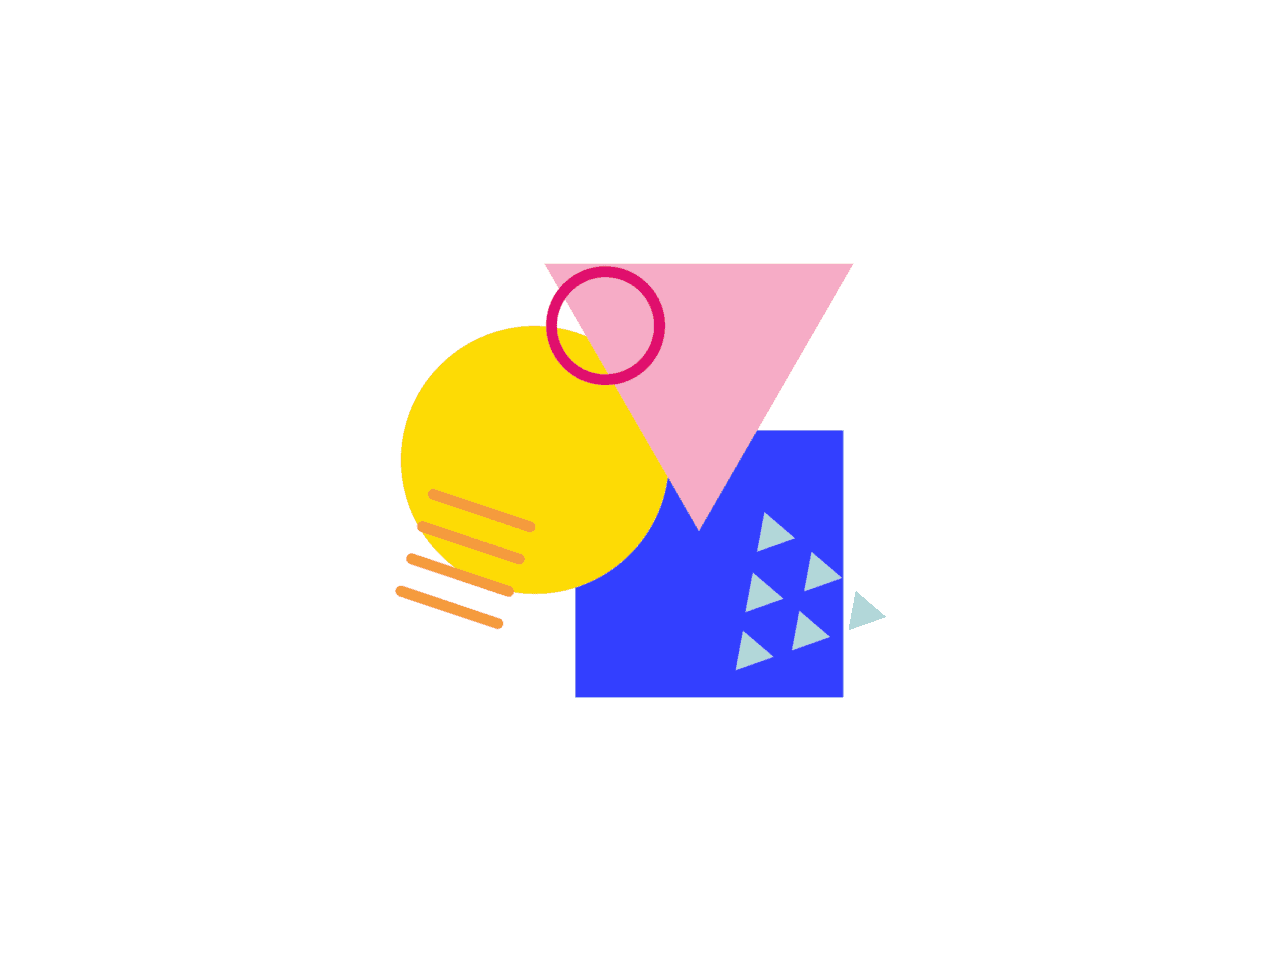 New logo of pink triangle, yellow circle and blue square close to each other.